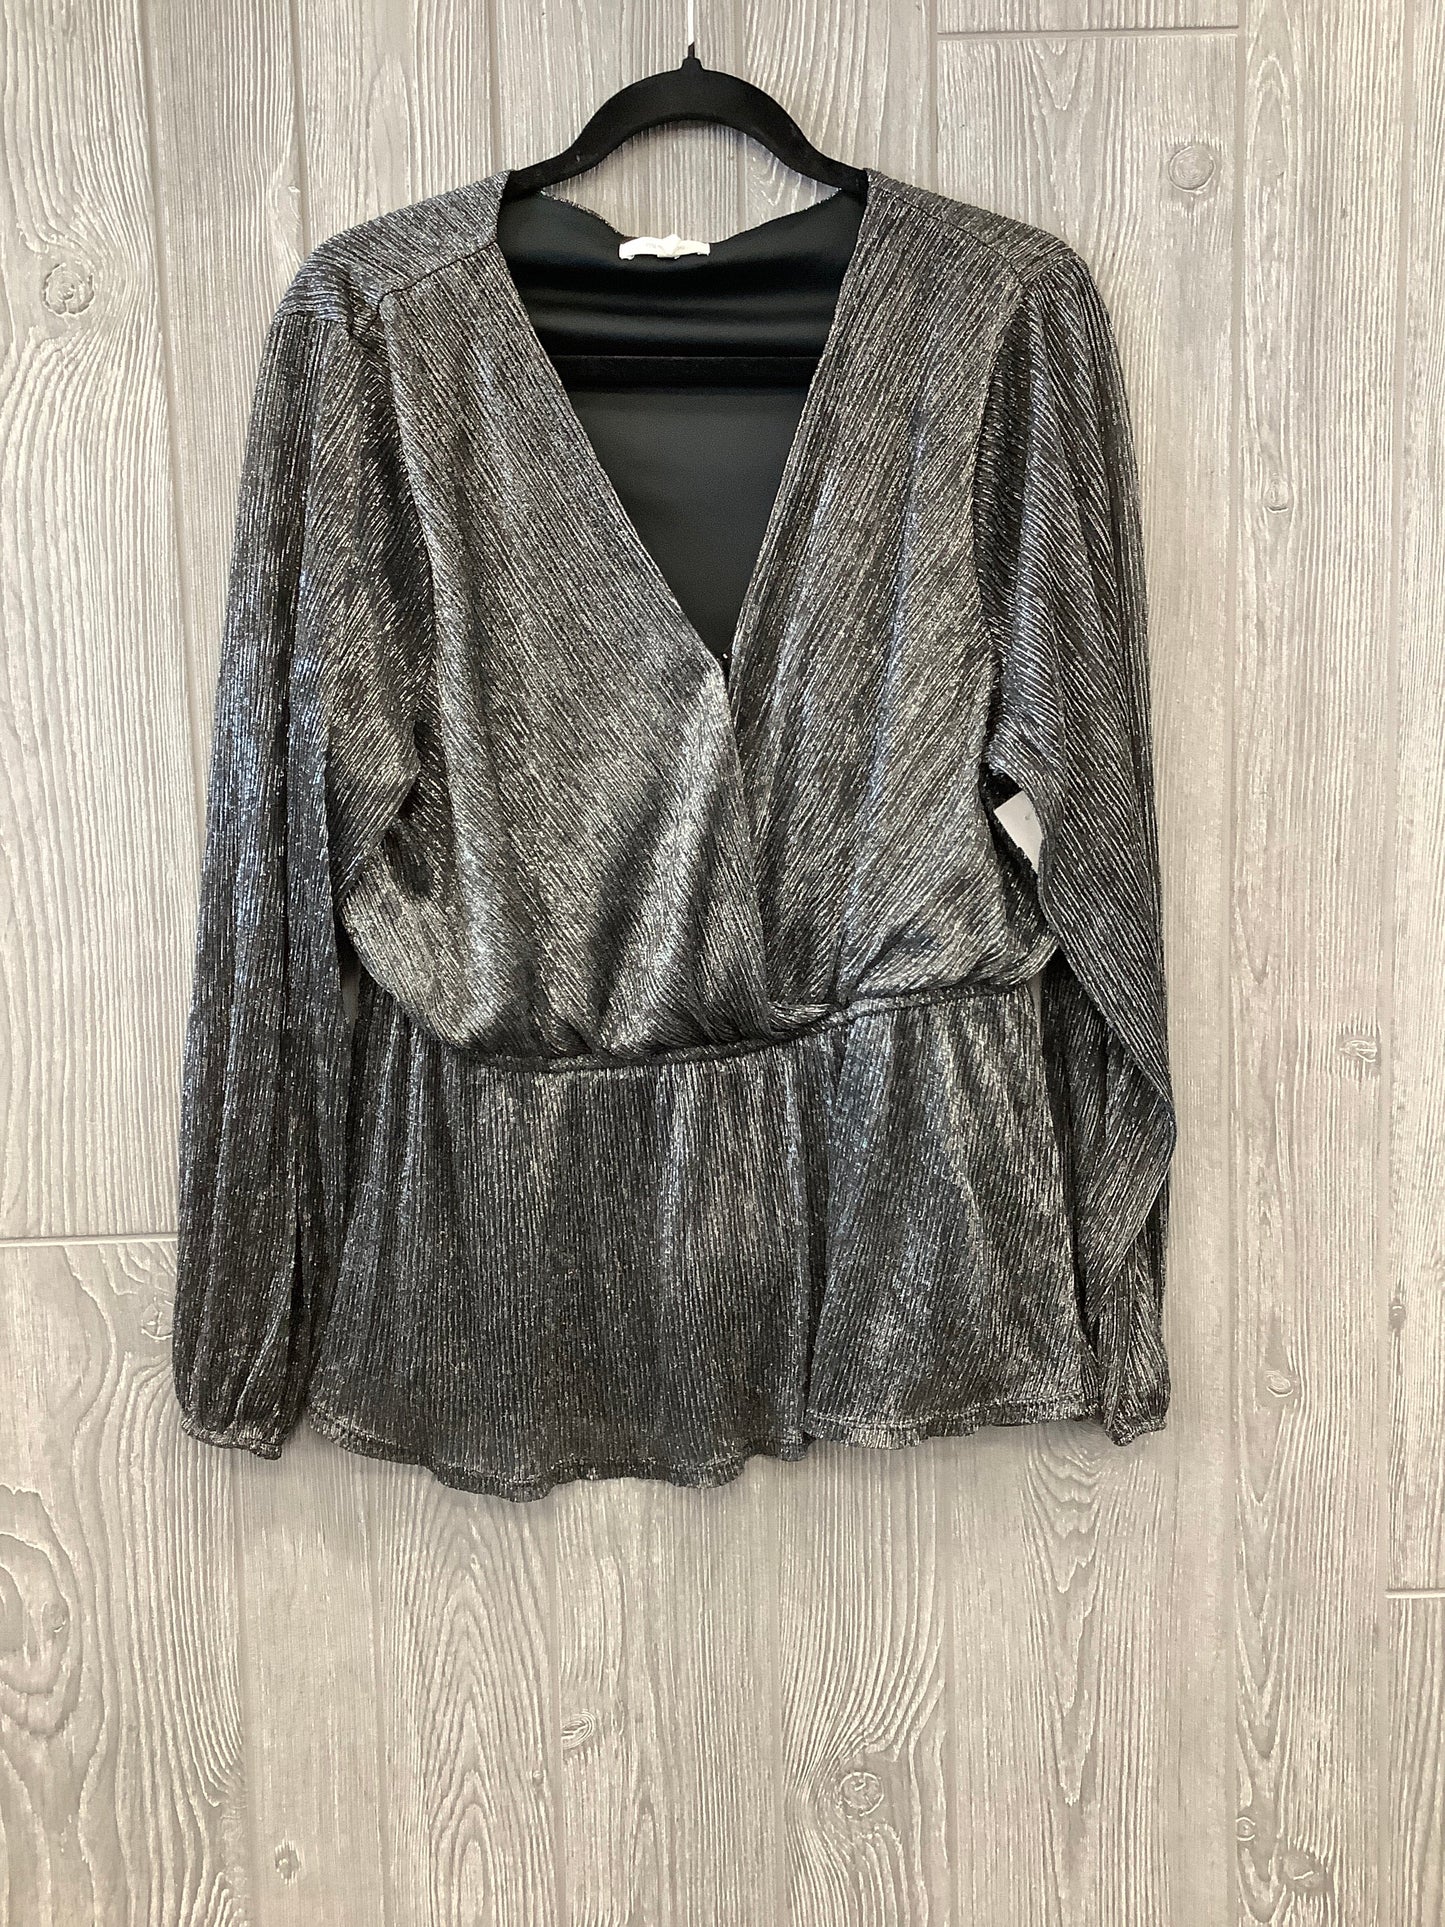 Silver Blouse Long Sleeve Maurices, Size 1x